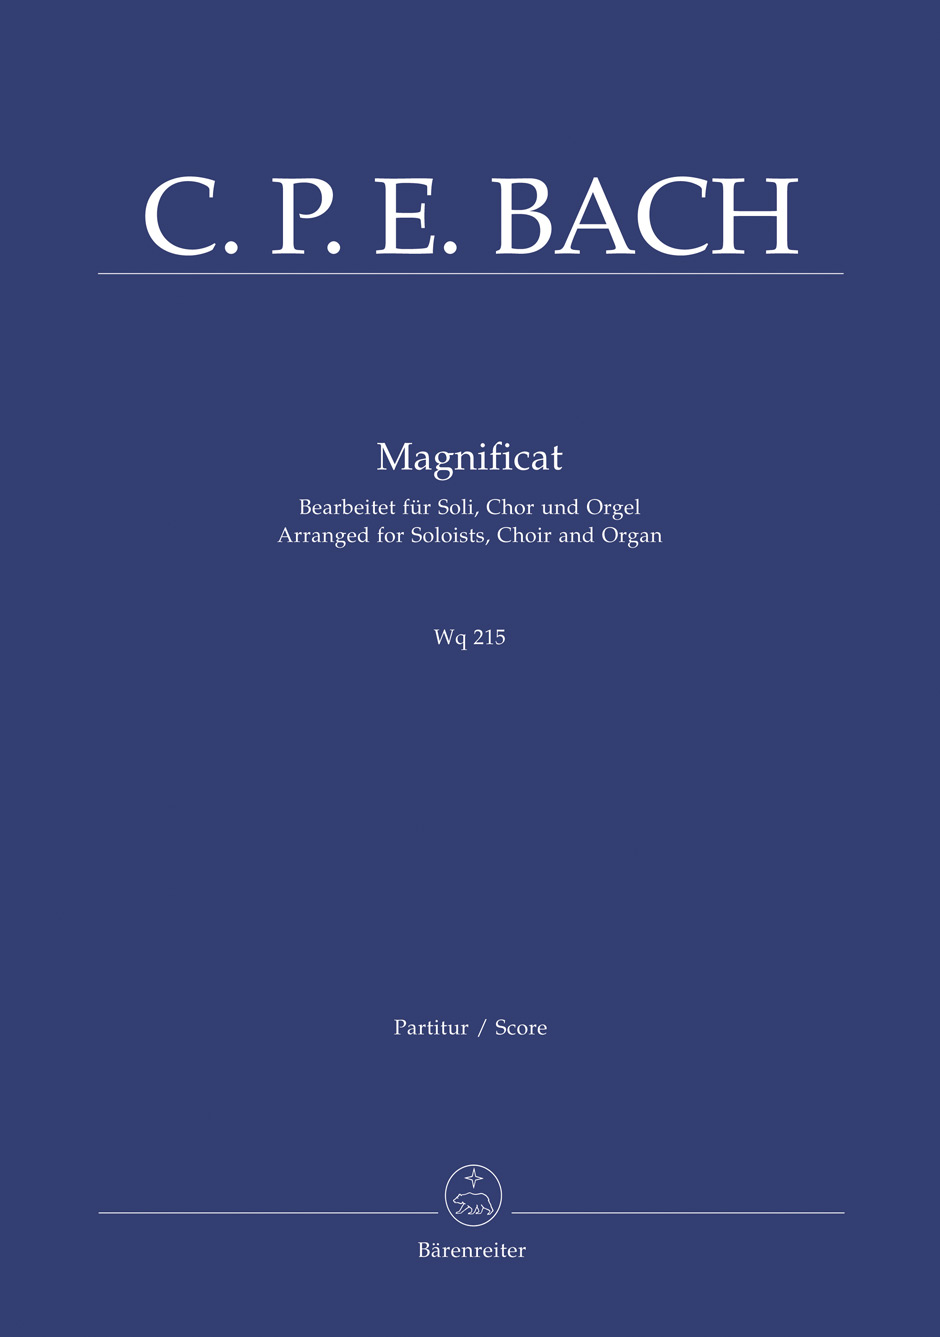 Nystedt immortal bach pdf